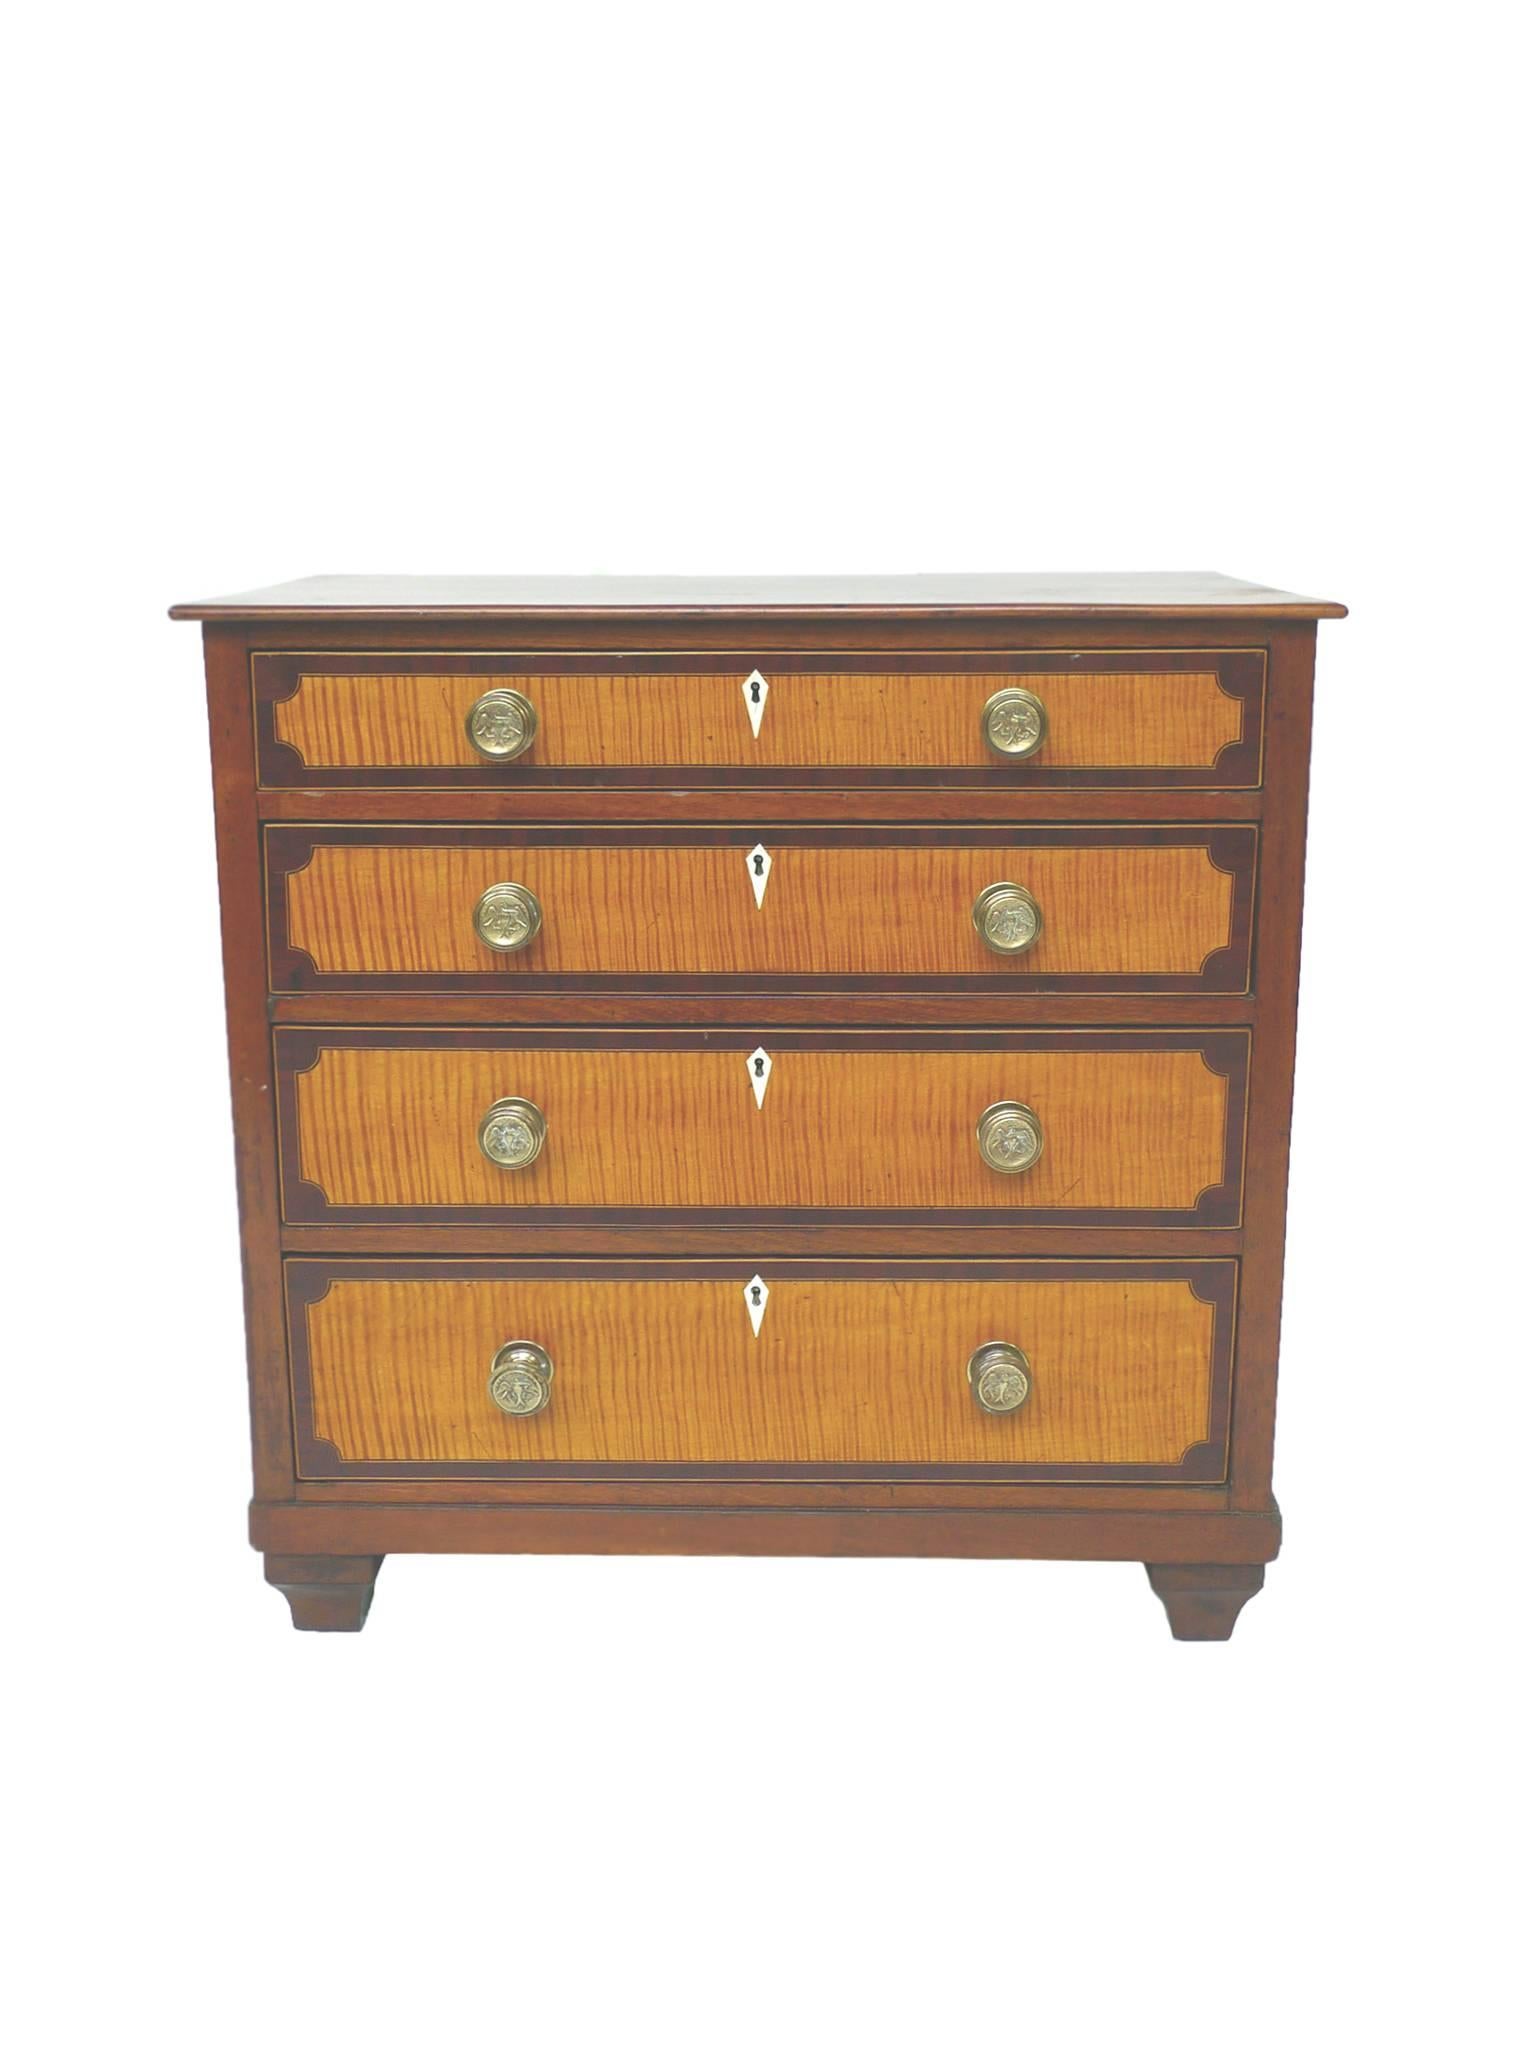 This Federal-era case piece is crafted from maple wood. The design includes four graduated drawers with flame tiger maple fronts, round pulls with an embossed bird emblem, and square turned bun feet. This modest-sized bureau has been refinished,